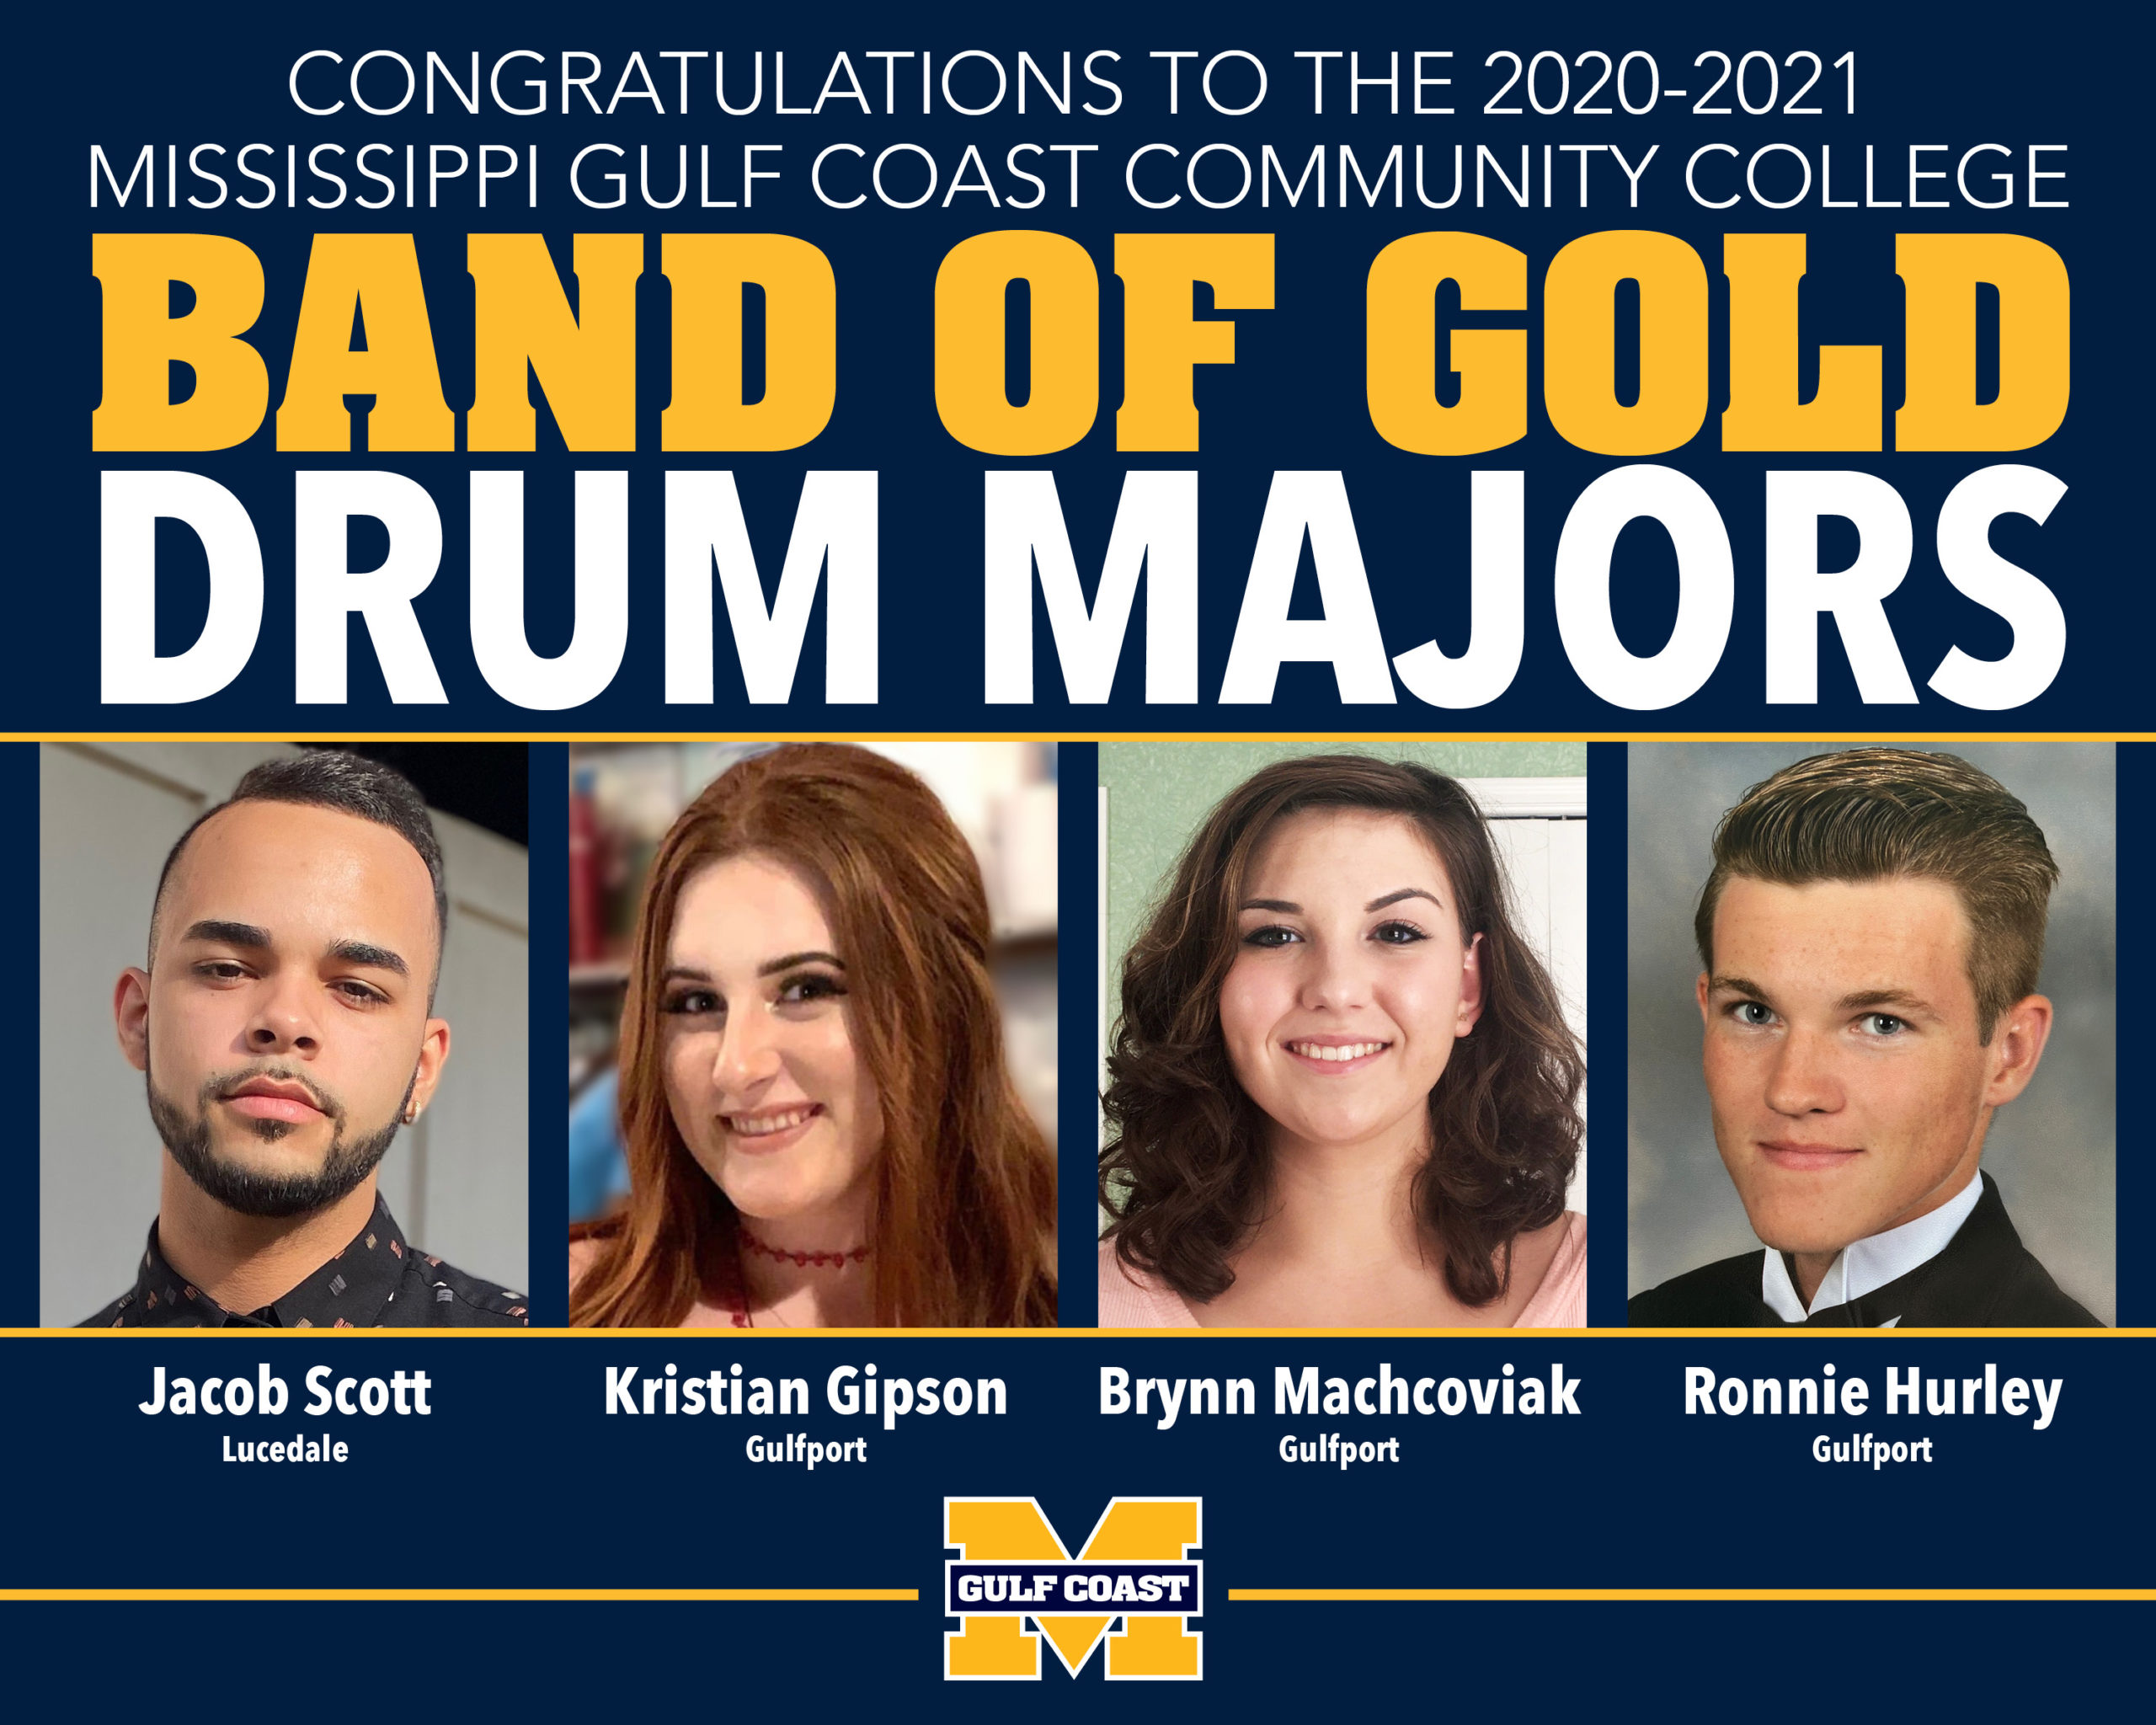 Photo and congratulations to the four new drum majors